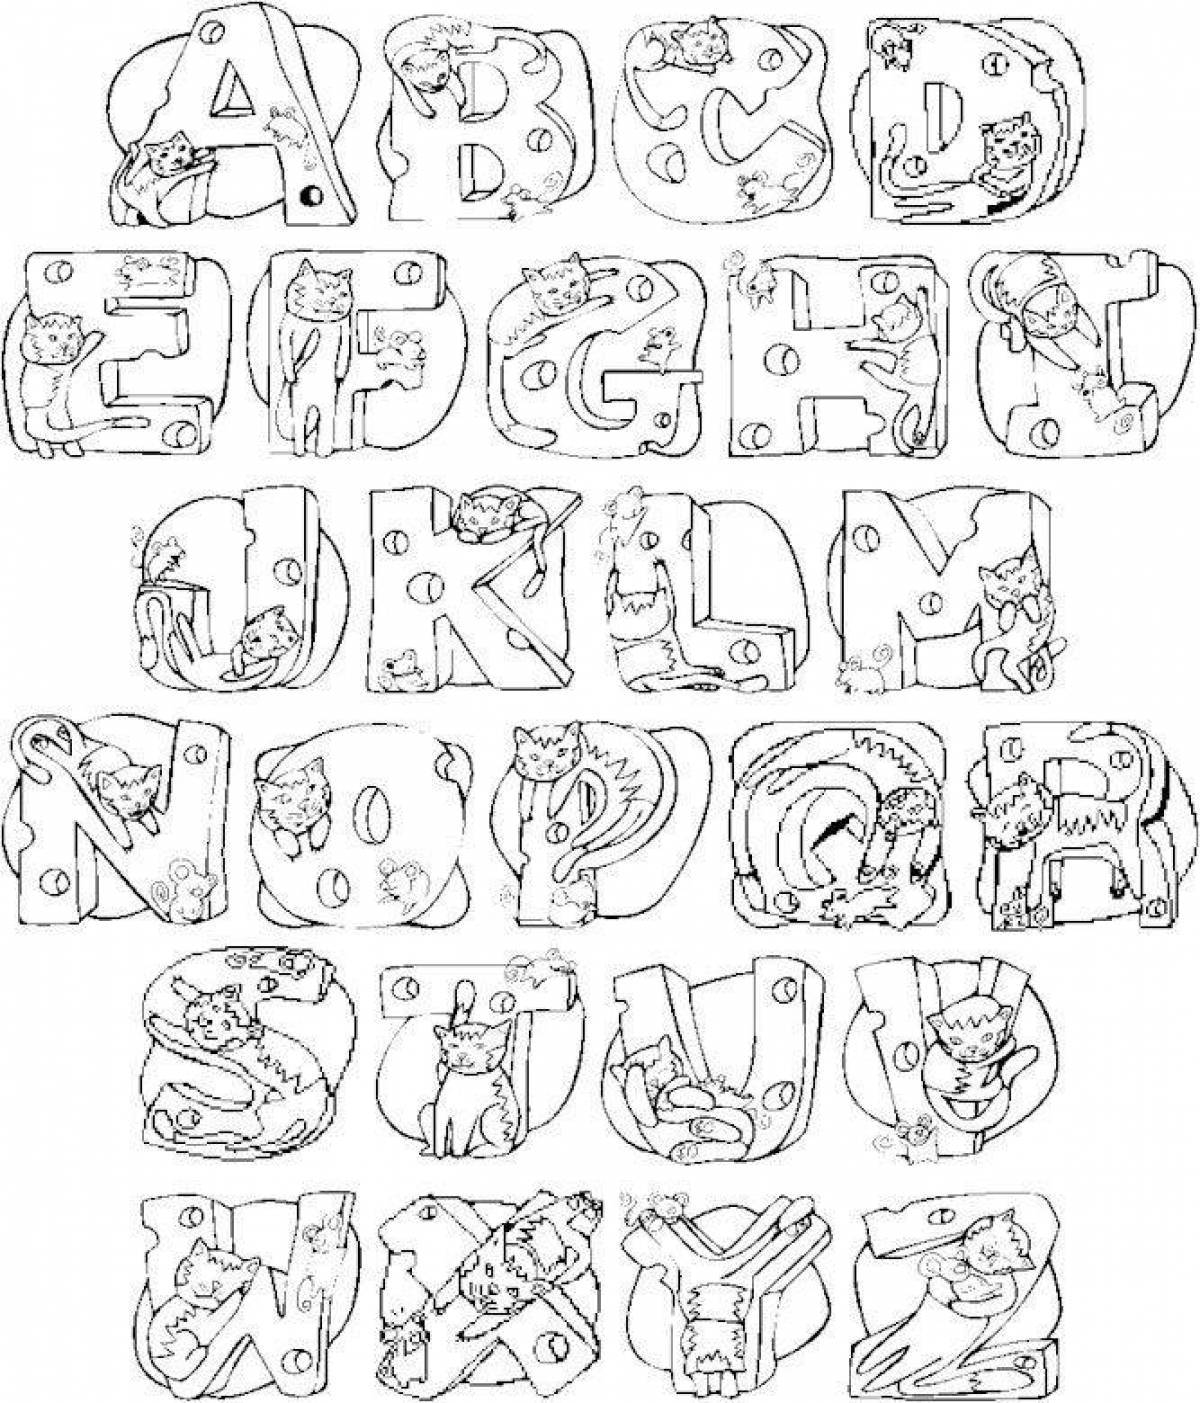 Alphabet signs coloring page